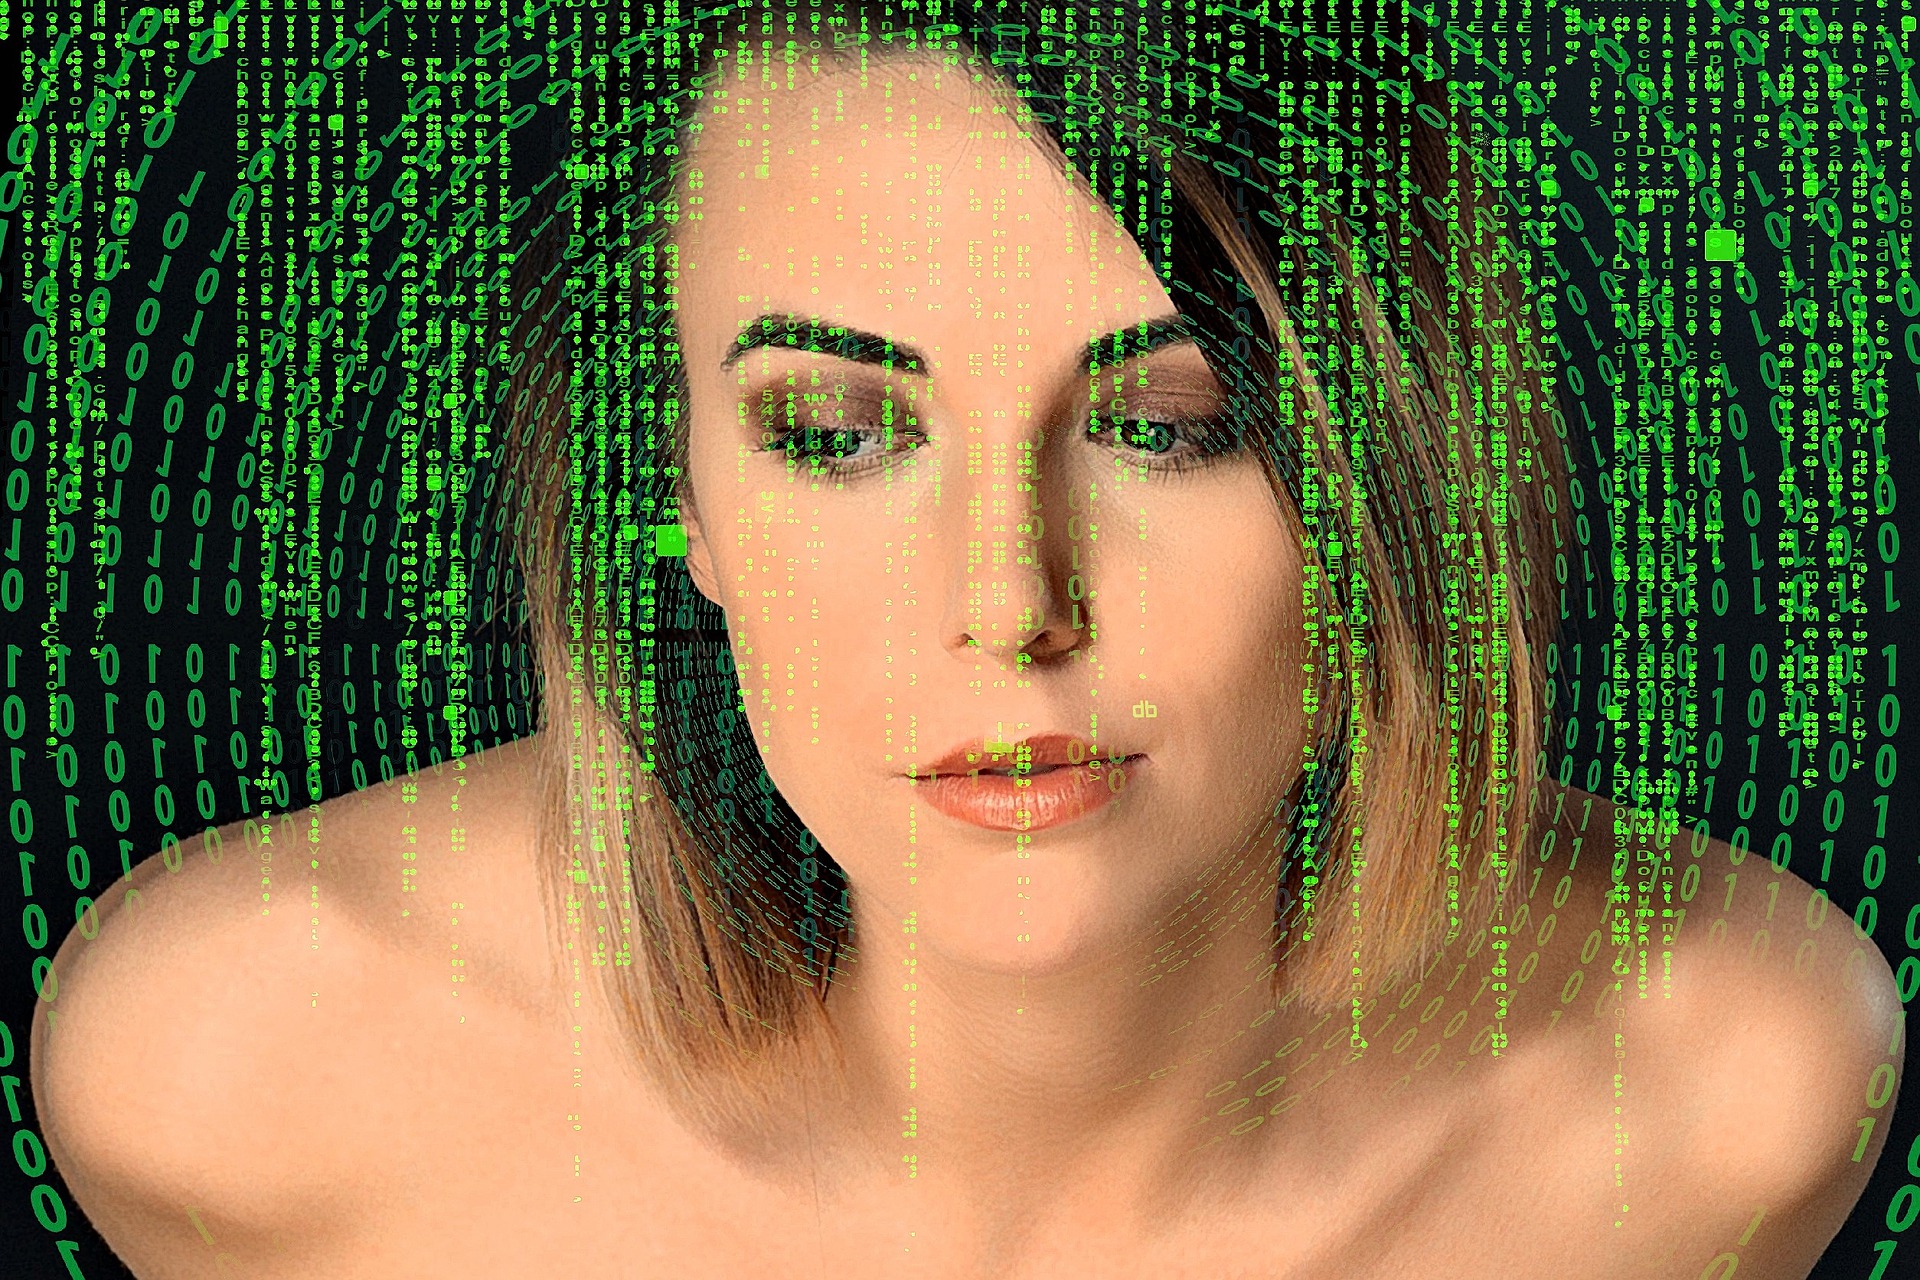 Blonde nameless woman in front of green matrix numbers